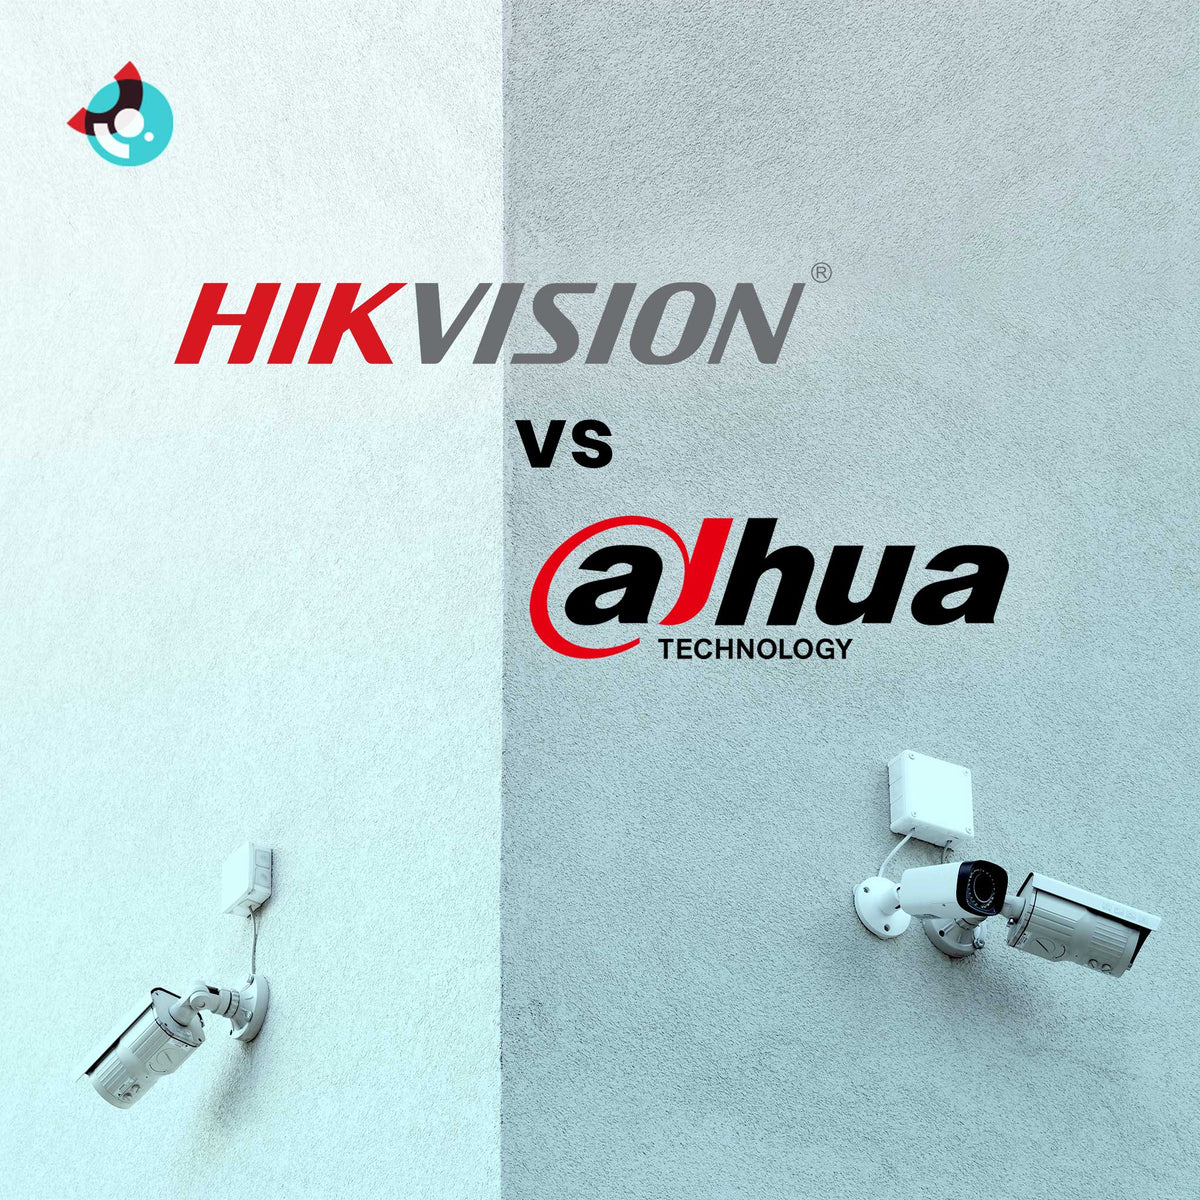 Hikvision vs. Dahua: Which IP Camera Brand is Better for Your Security Needs?